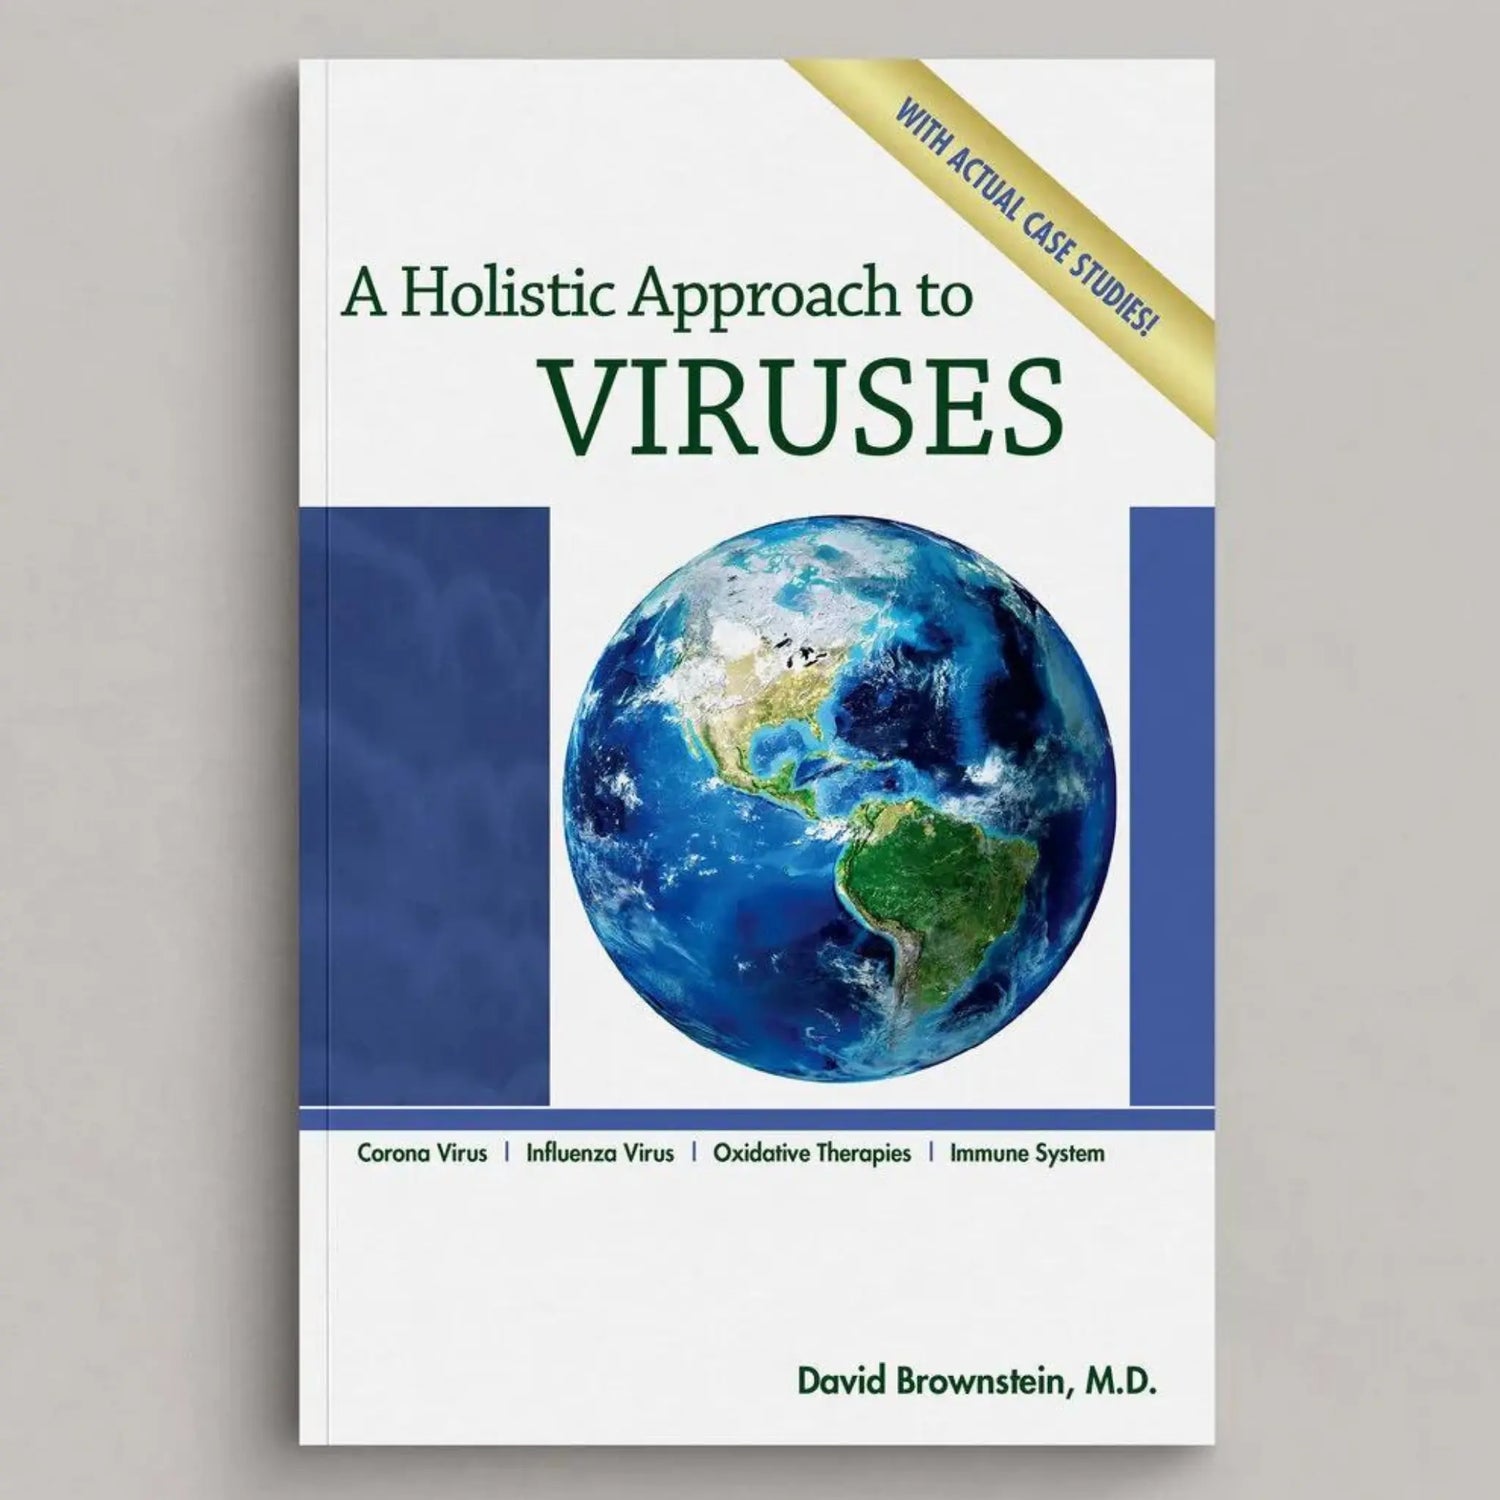 A Holistic Approach to Viruses by Dr. Brownstein